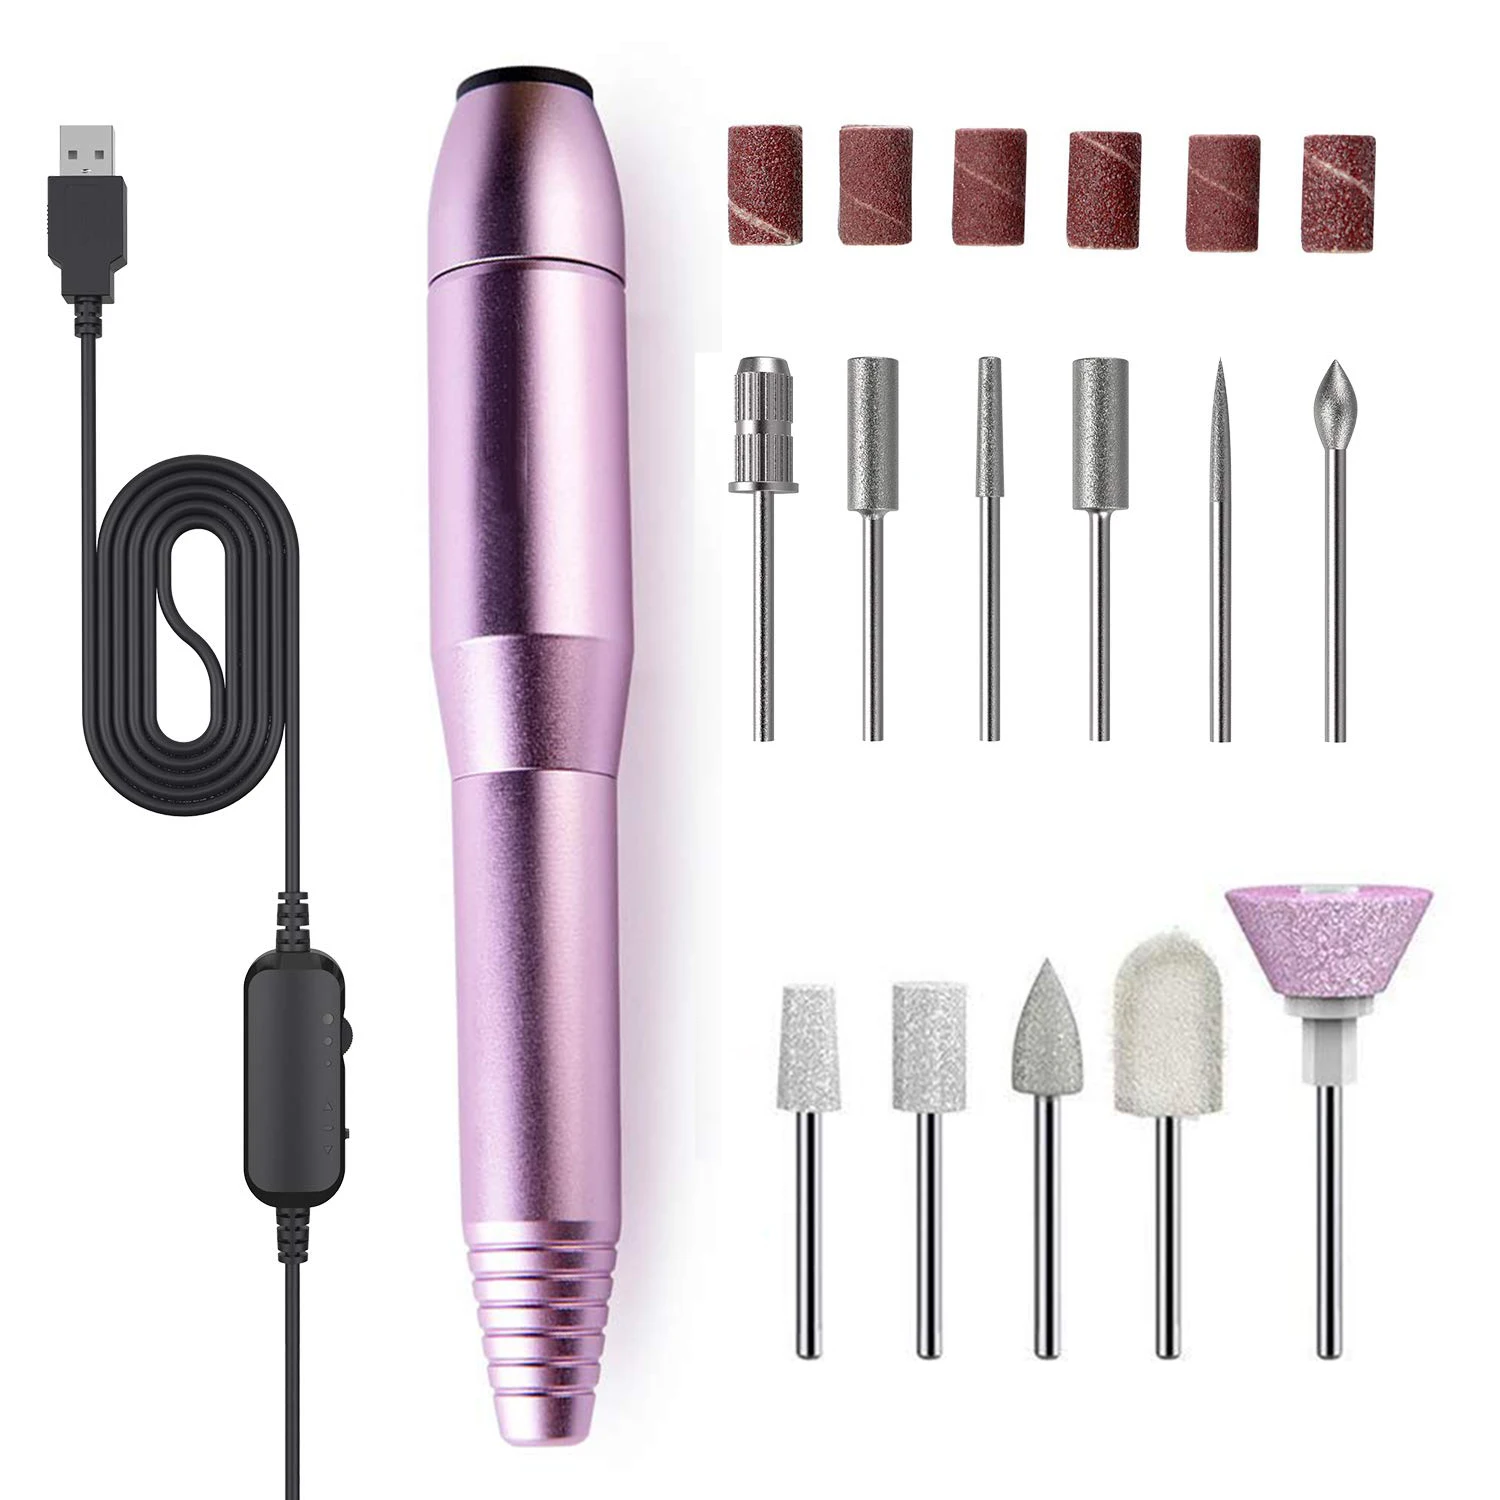 

Portable Electric Nail Drill ,Professional Efile Nail Drill Kit for Gel Nails, Manicure Pedicure Polishing Shape Tools, Pink